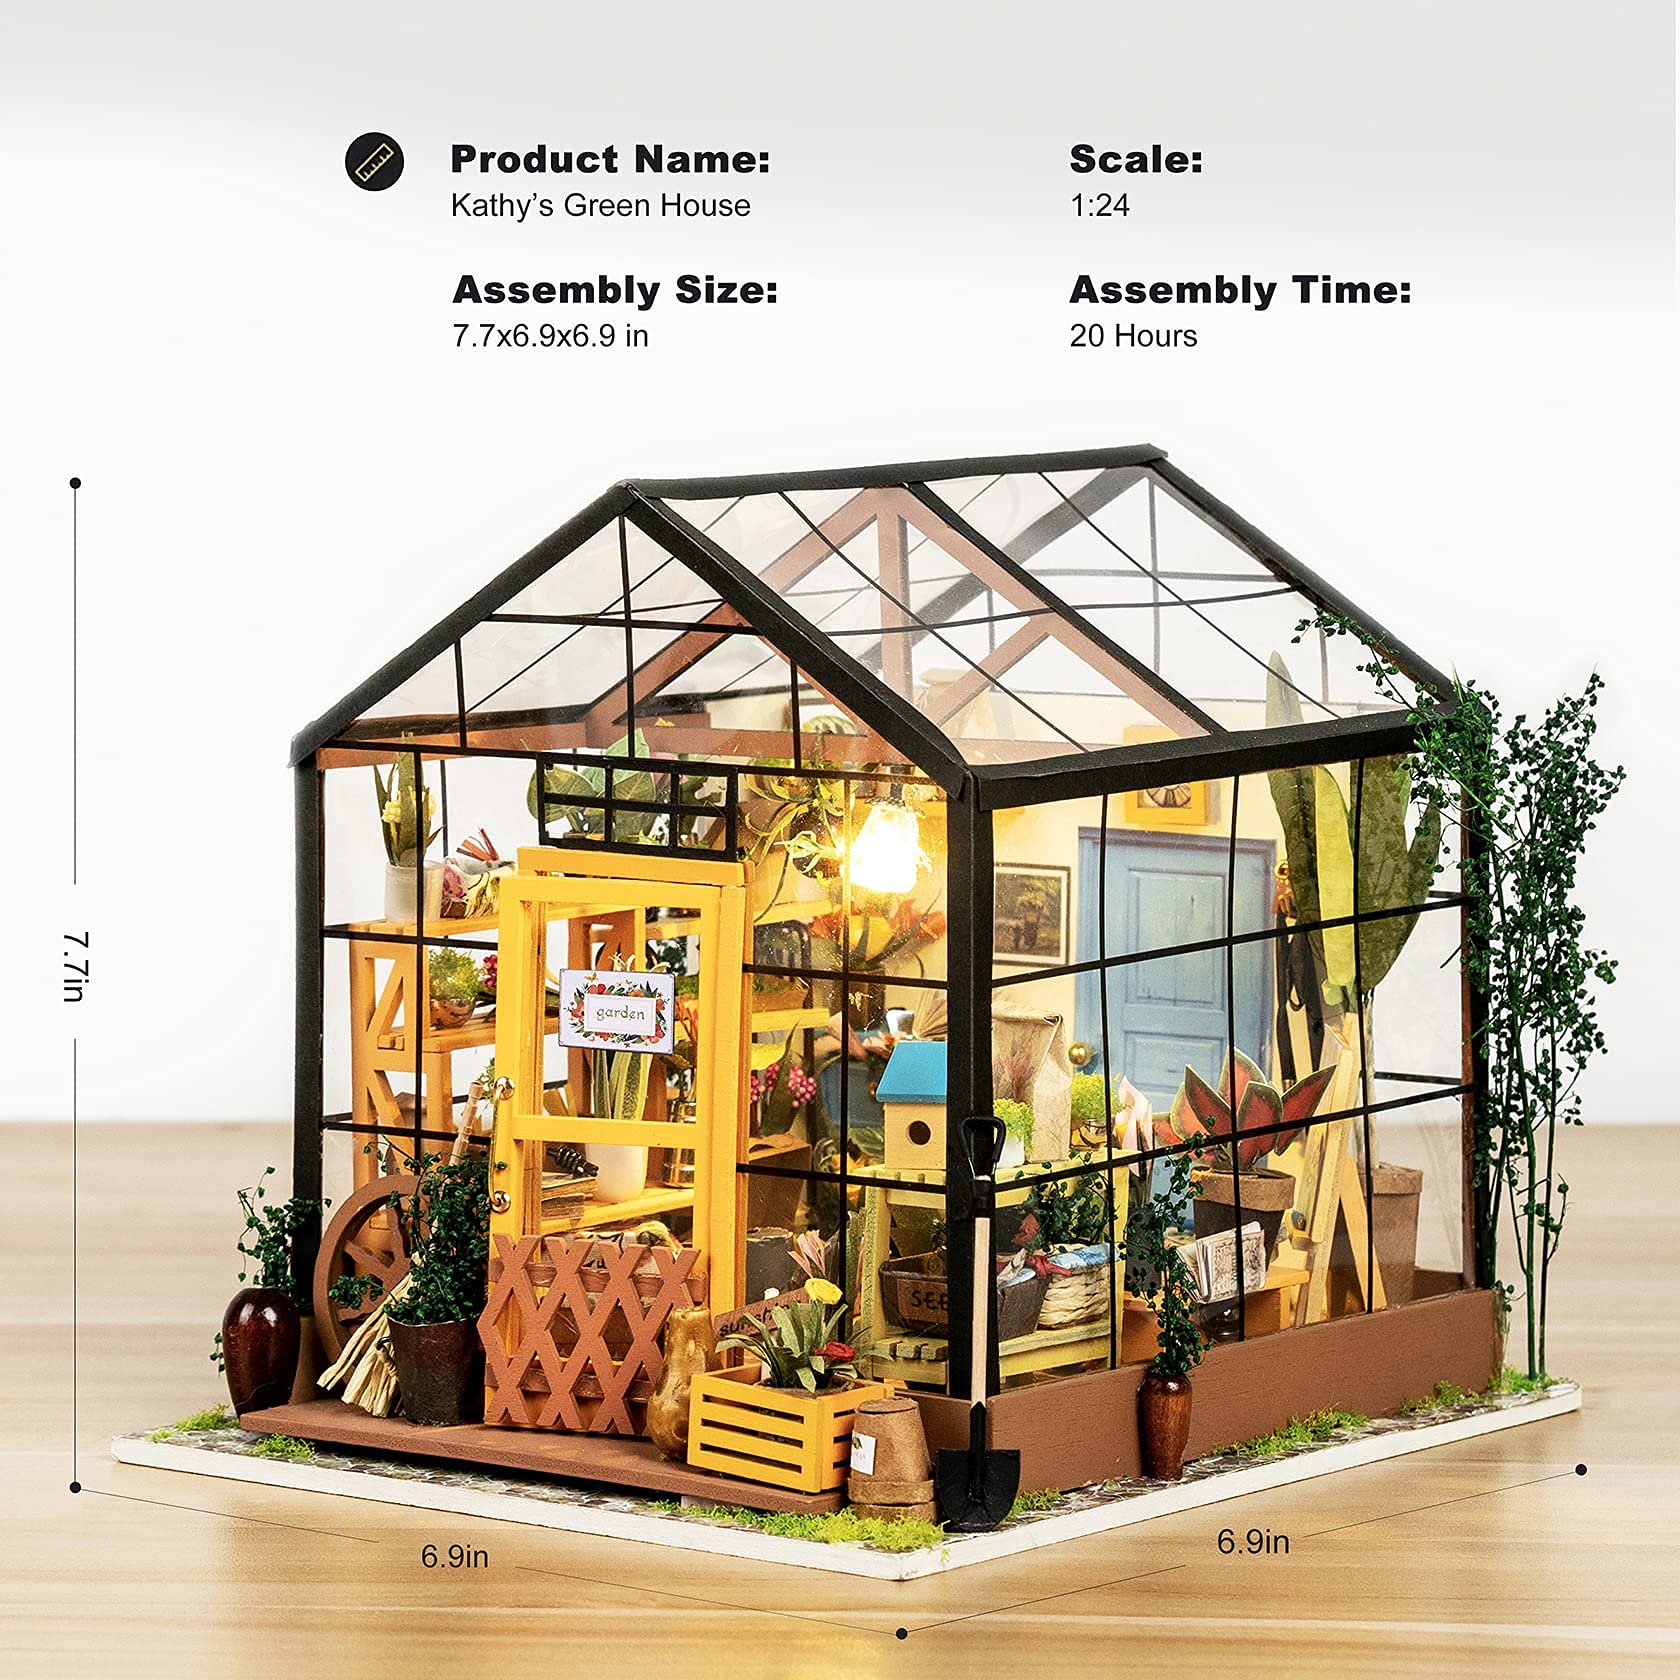 Rolife DIY Miniature Dollhouse Craft Model Kit for Adults to Build Simon's Coffee & Cathy's Greenhouse